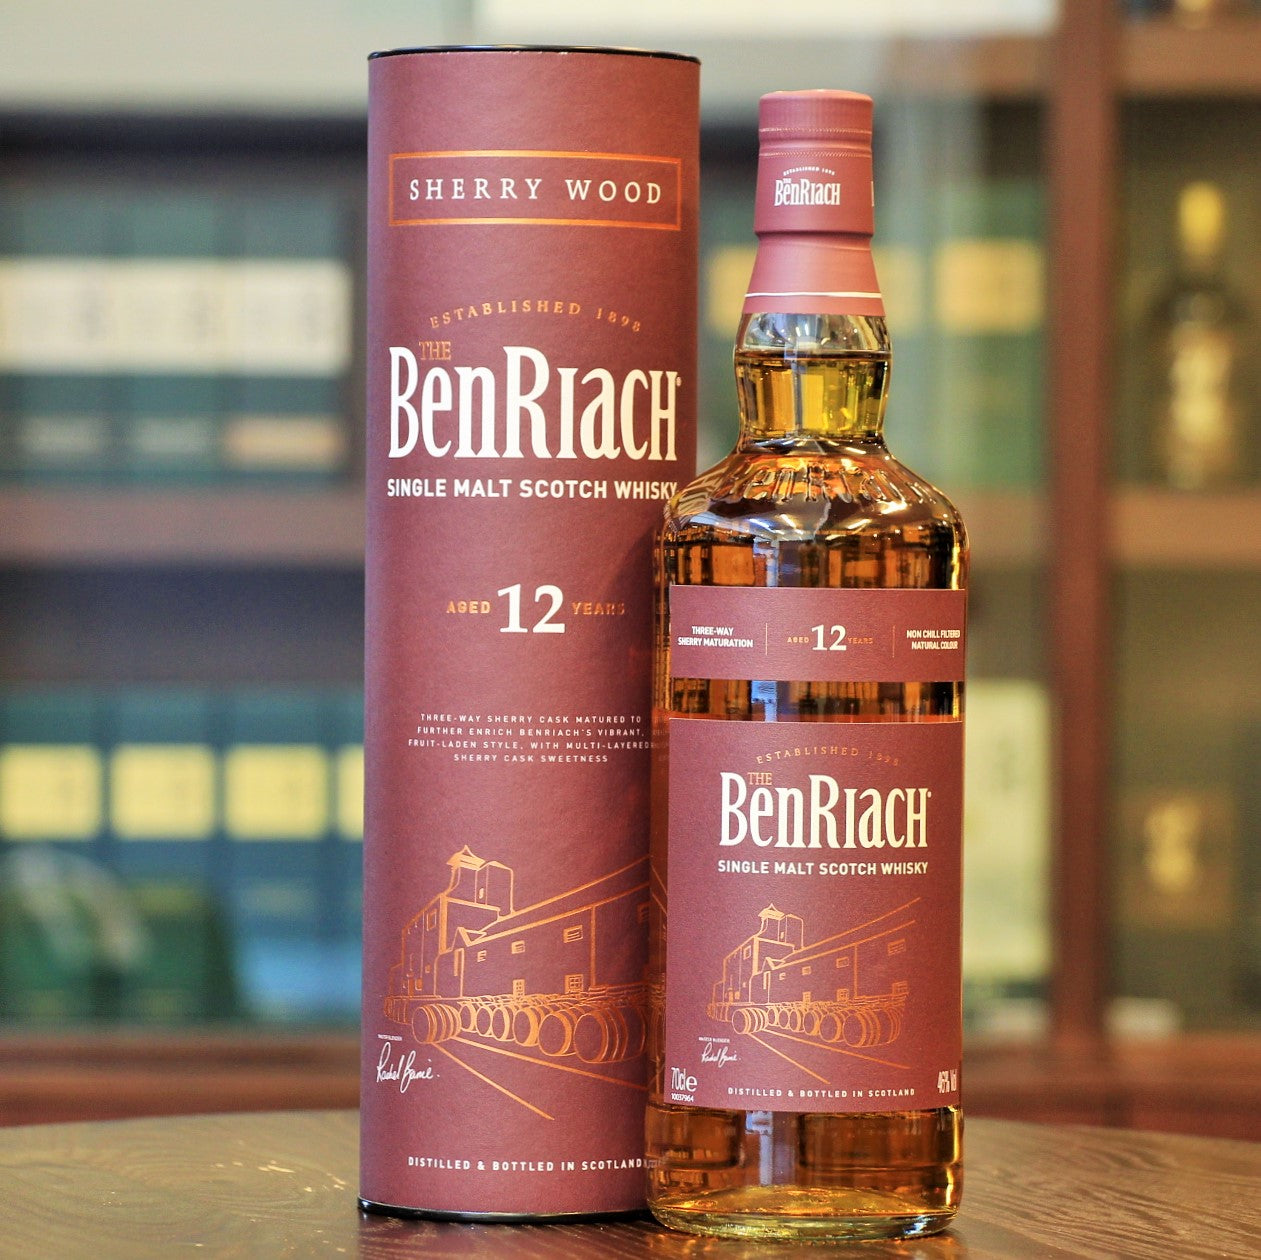 A Sherry Cask matured whisky and aged for 12 years from Benriach. Available on Mizunara The Shop in Hong Kong, a specialist liquor store with an extensive selection of Whiskies & Spirits.